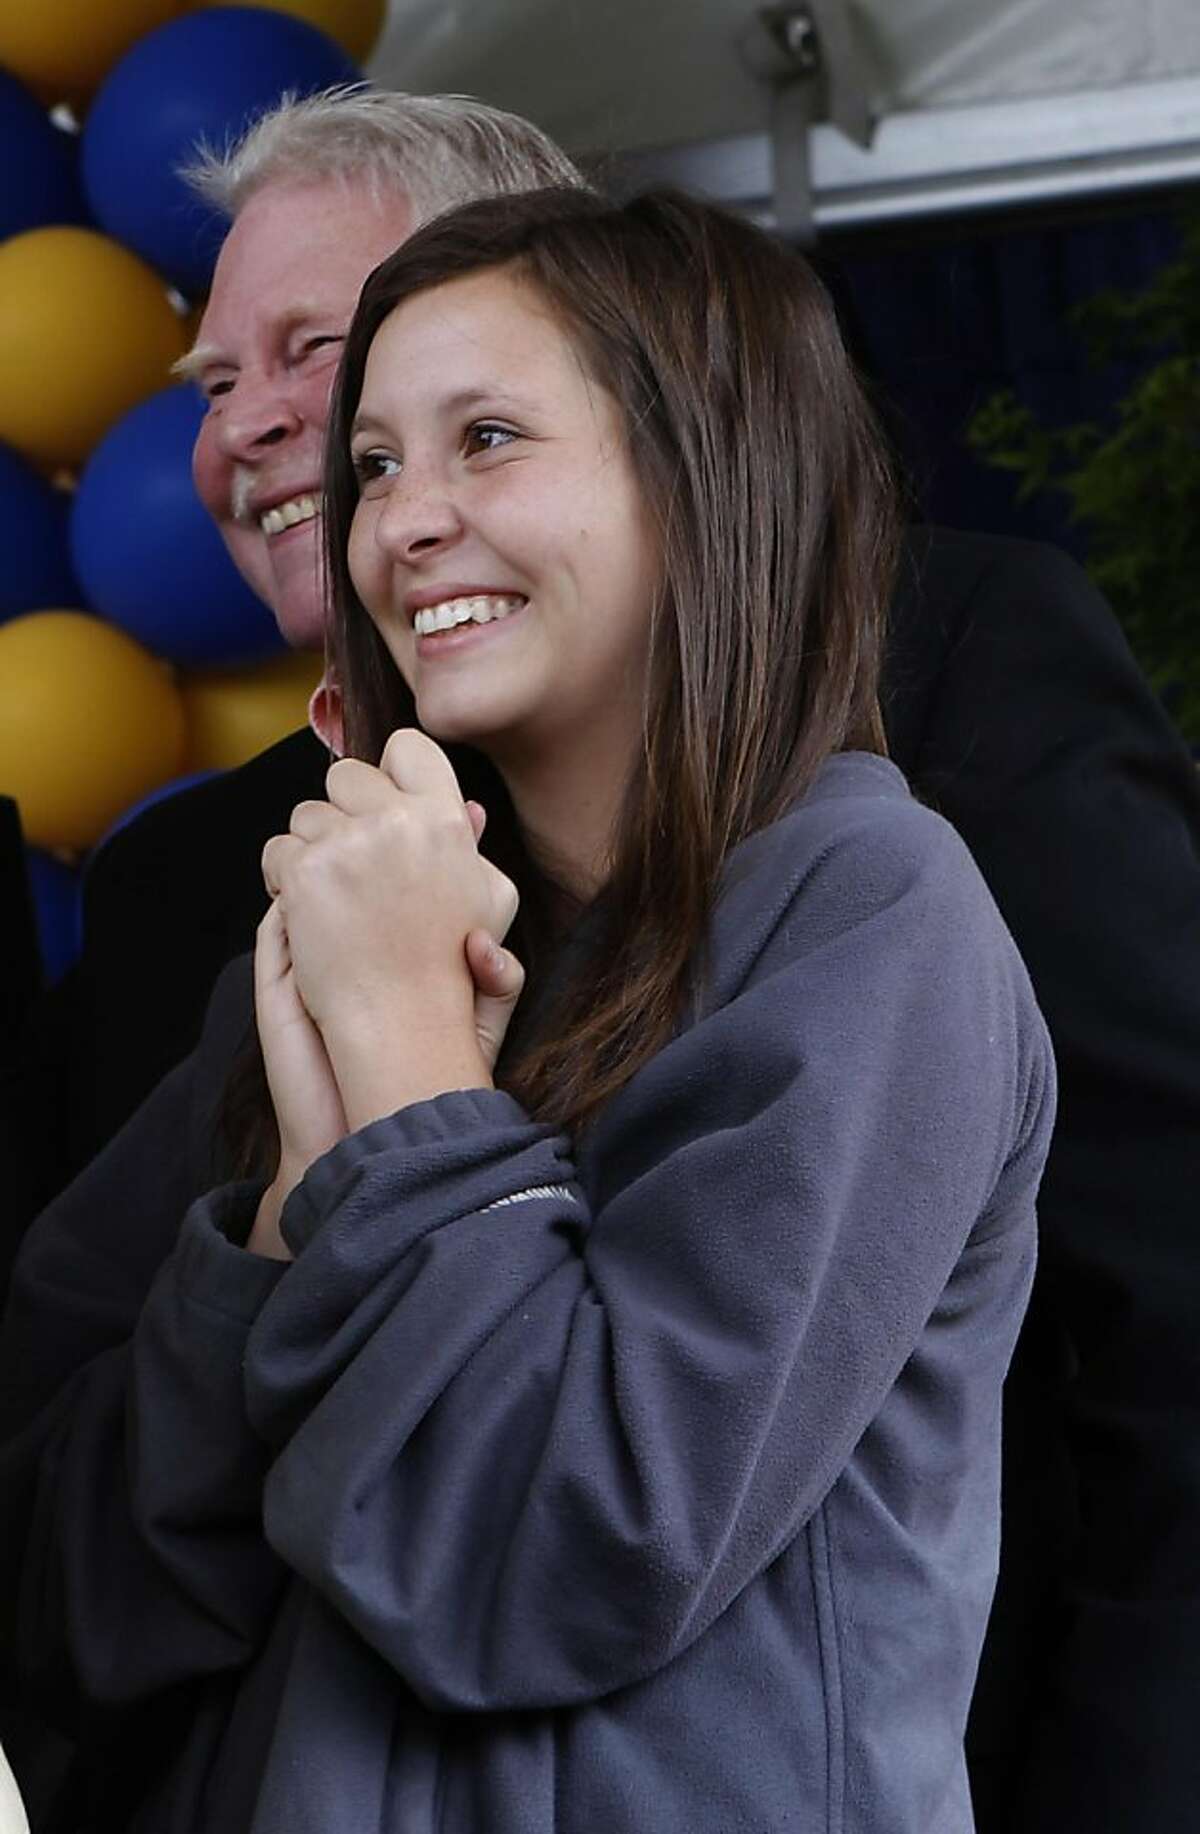 Laura Whitney smiles as her brother Austin walks across the stage during commencement ceremonies at UC Berkeley on Saturday. Austin Whitney, who can no longer walk following an auto accident in 2007, wore an exoskeleton device designed by a UC Berkeley engineering professor and graduate students. In the background at left is their father, Jim.